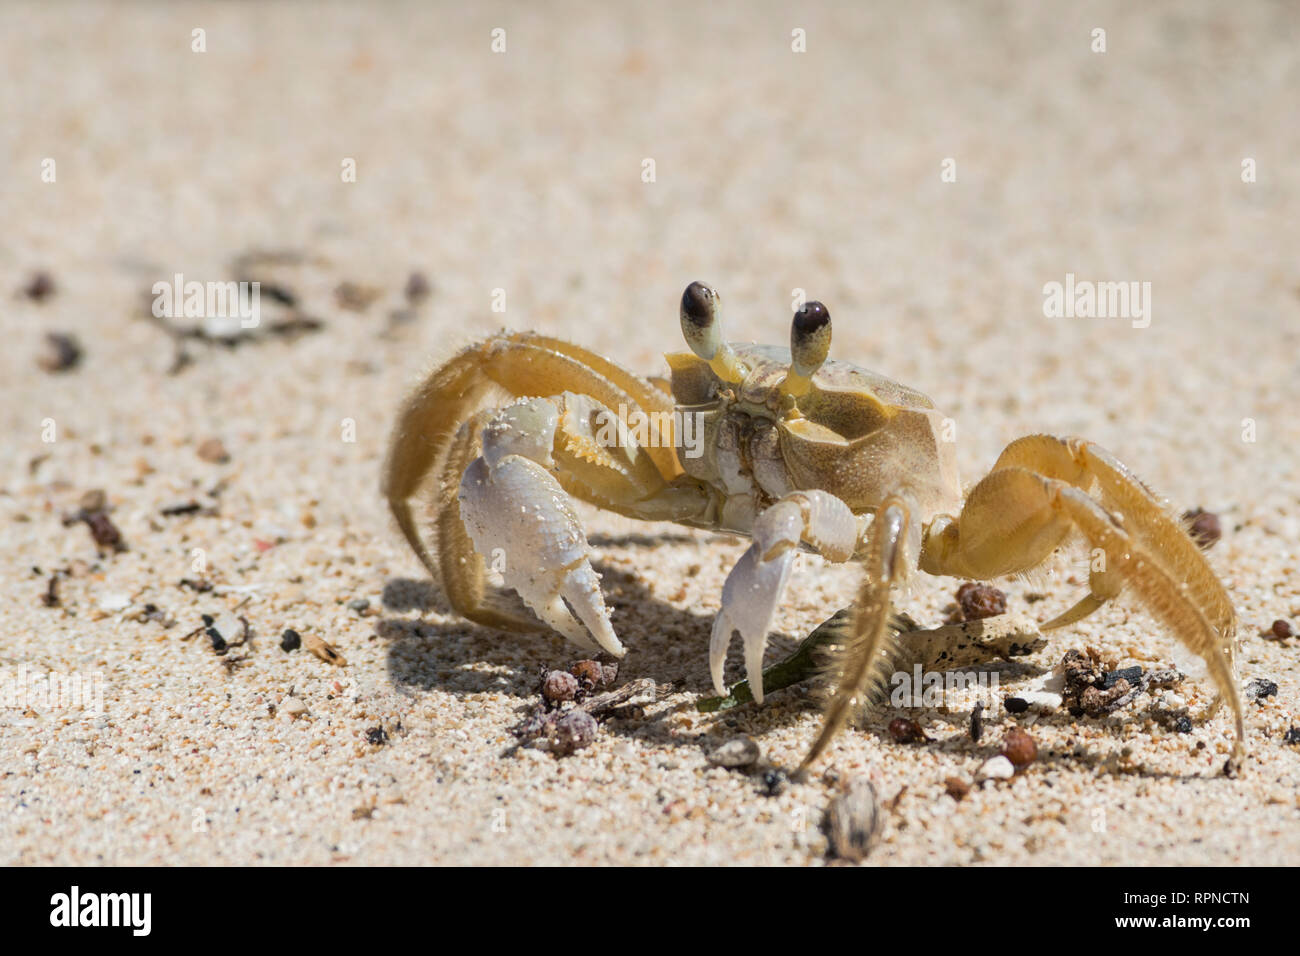 Zoologia / animali, crostacei (crostacei), Ghost Crab, Port Antonio, Giamaica, Additional-Rights-Clearance-Info-Not-Available Foto Stock